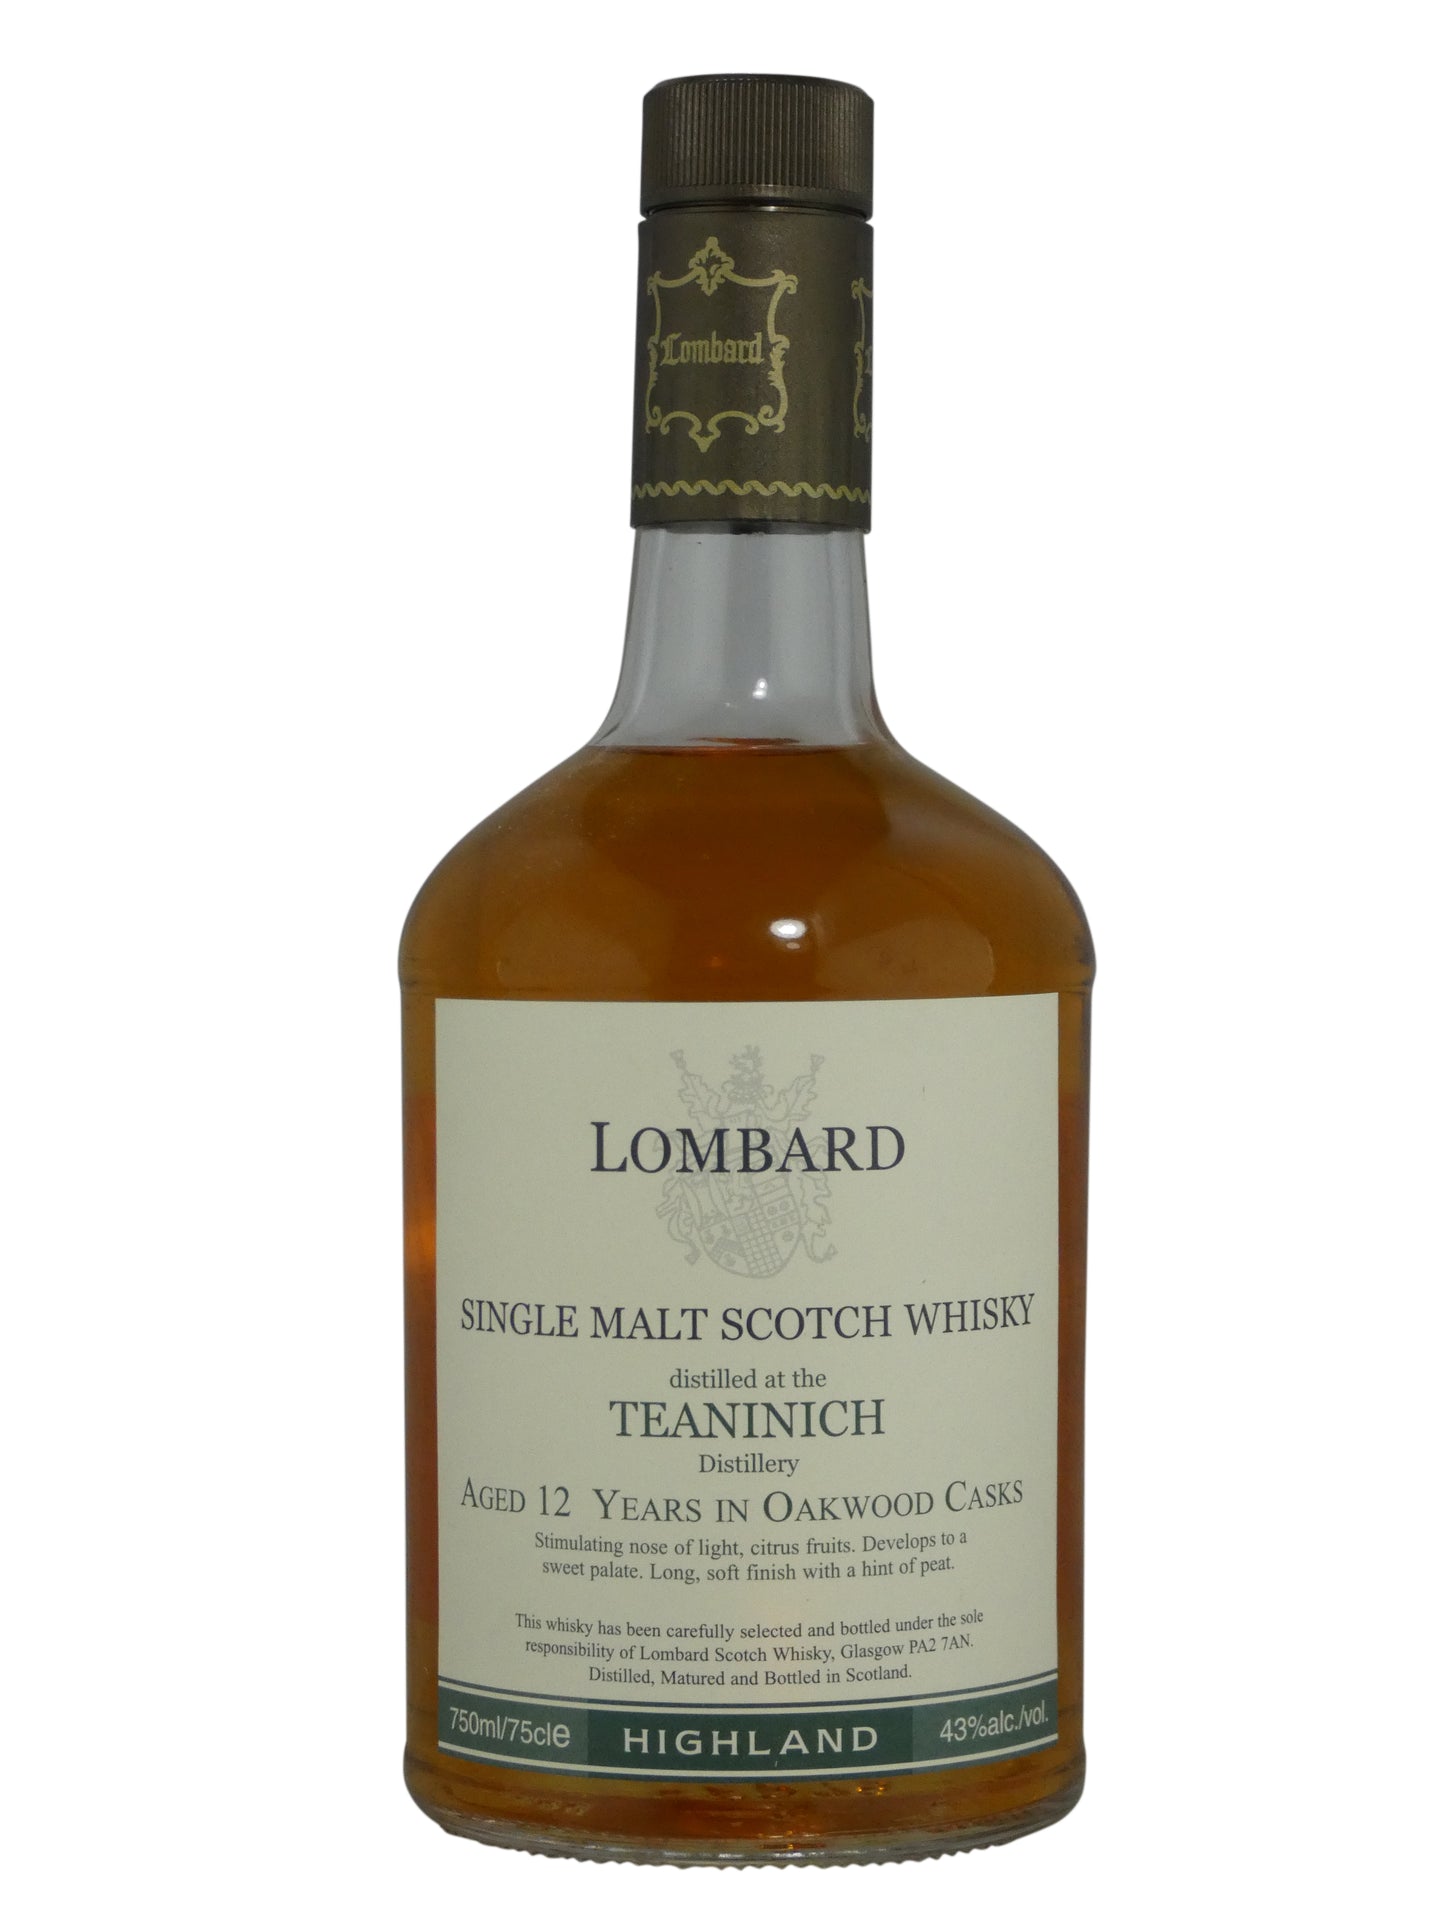 Lombard, Teaninich, Aged 12 years, 43% abv. (750ml)